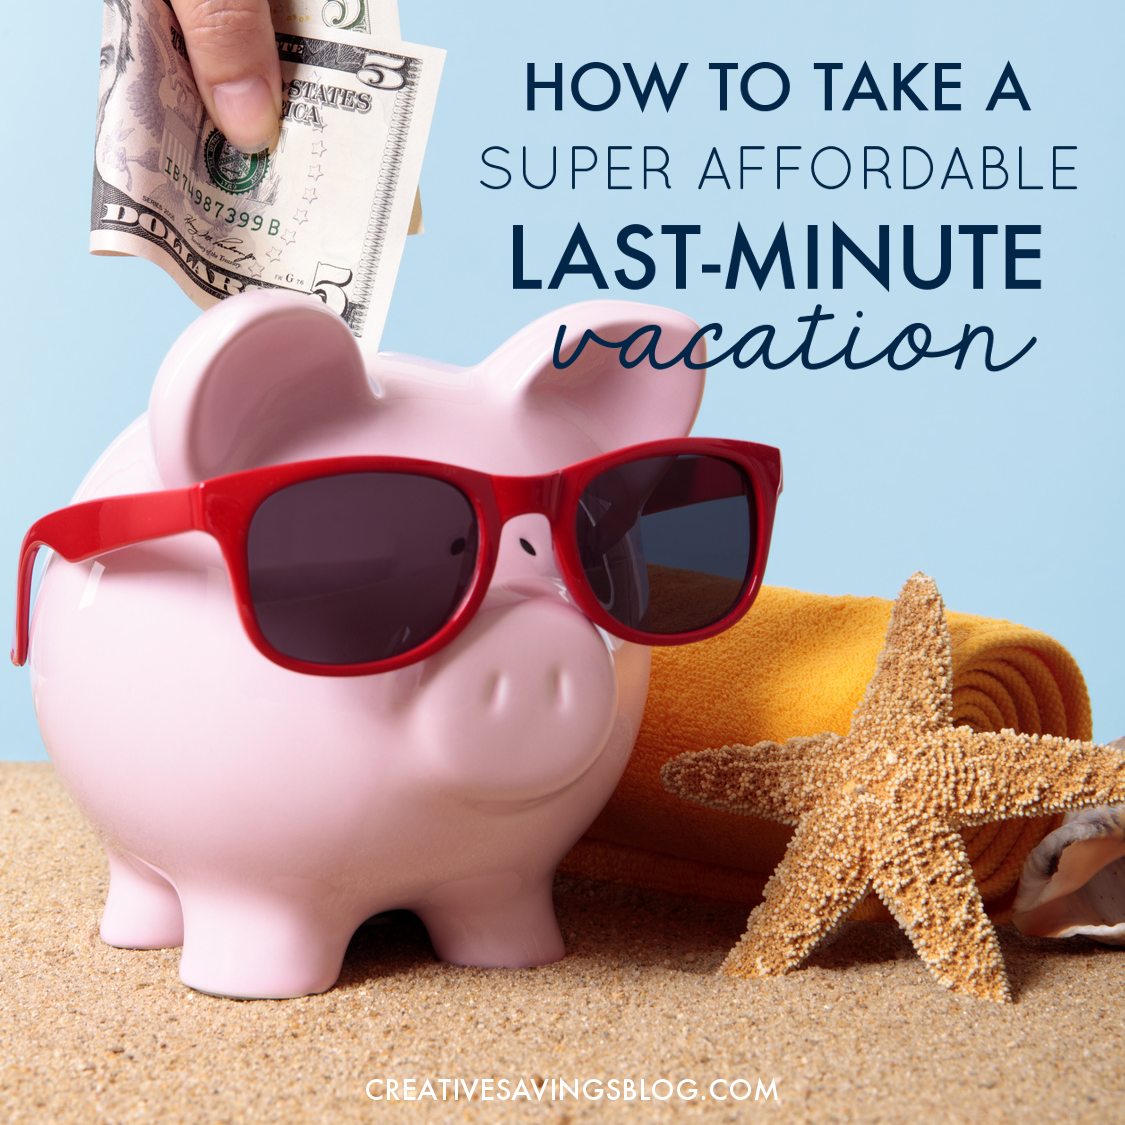 How to Take a Super Affordable Last Minute Vacation